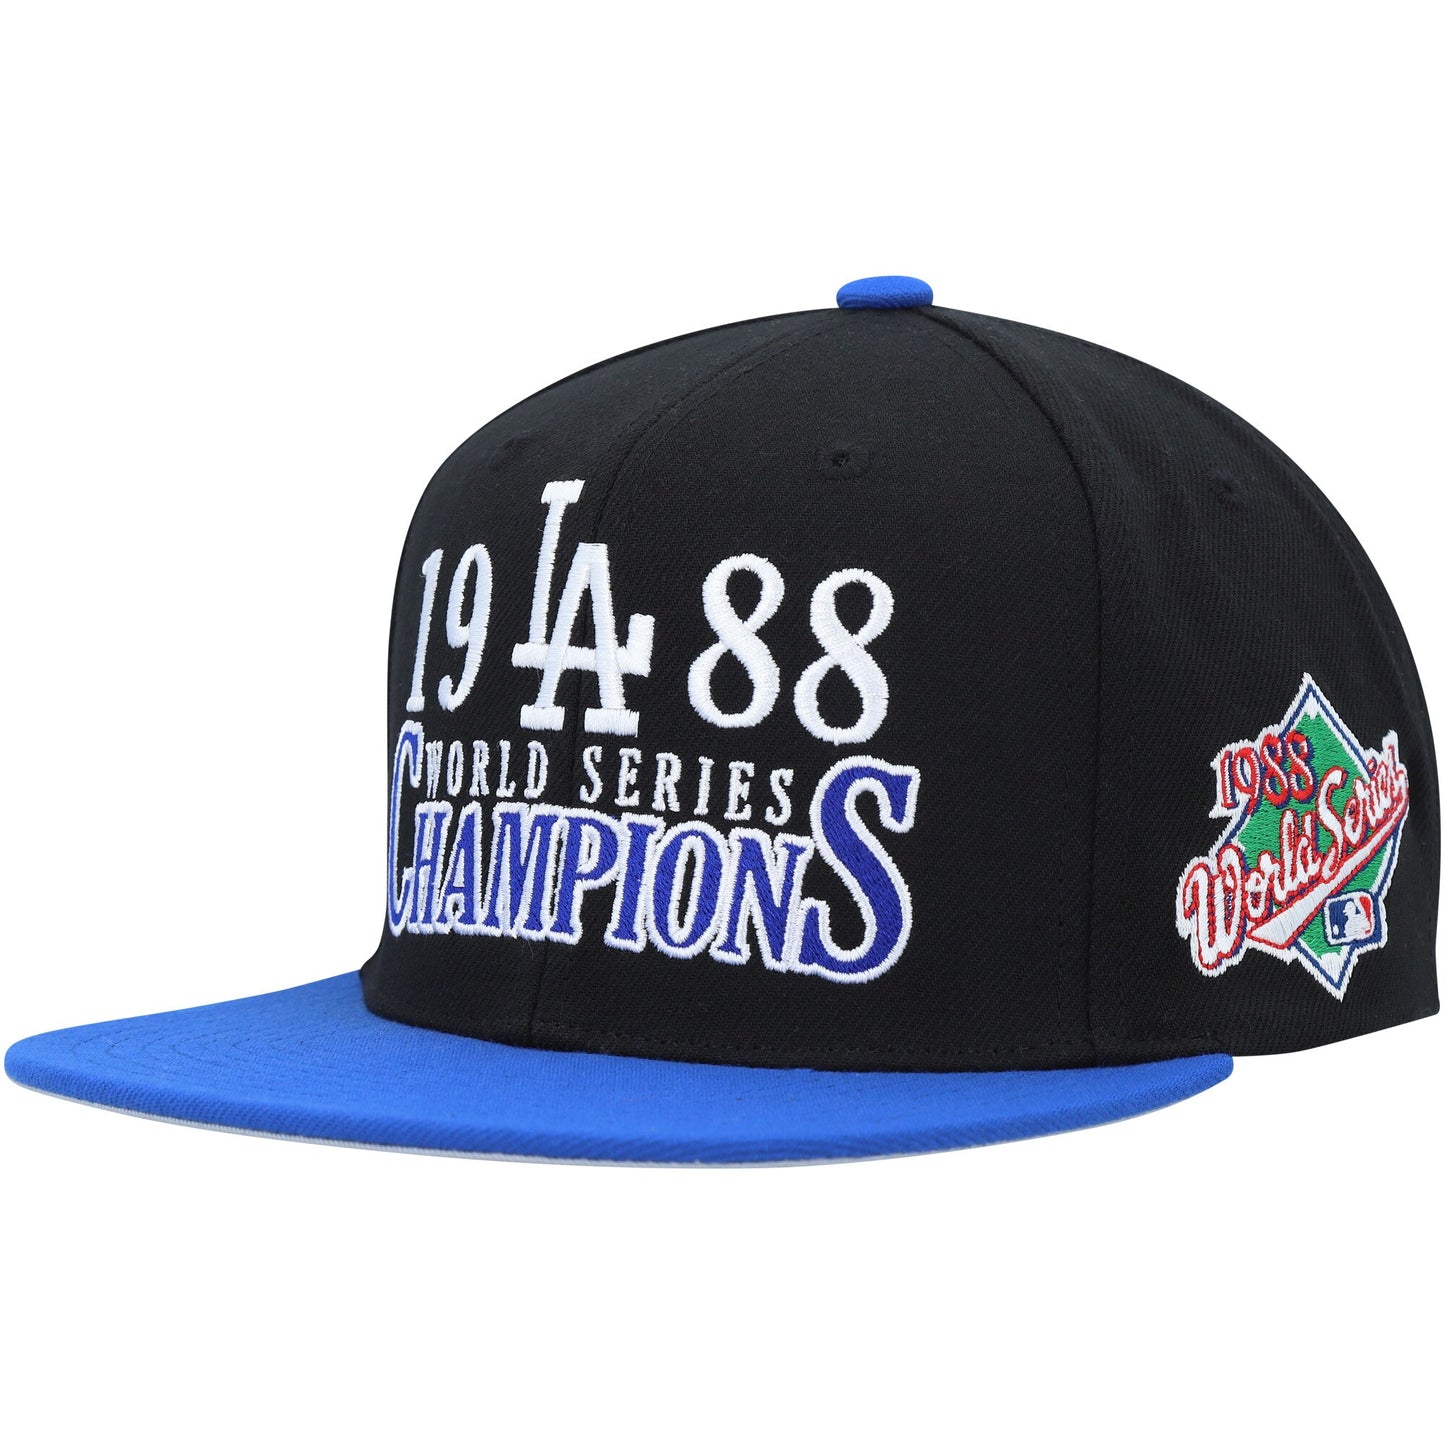 Los Angeles Dodgers Mitchell & Ness World Series Champs Snapback Hat - Black